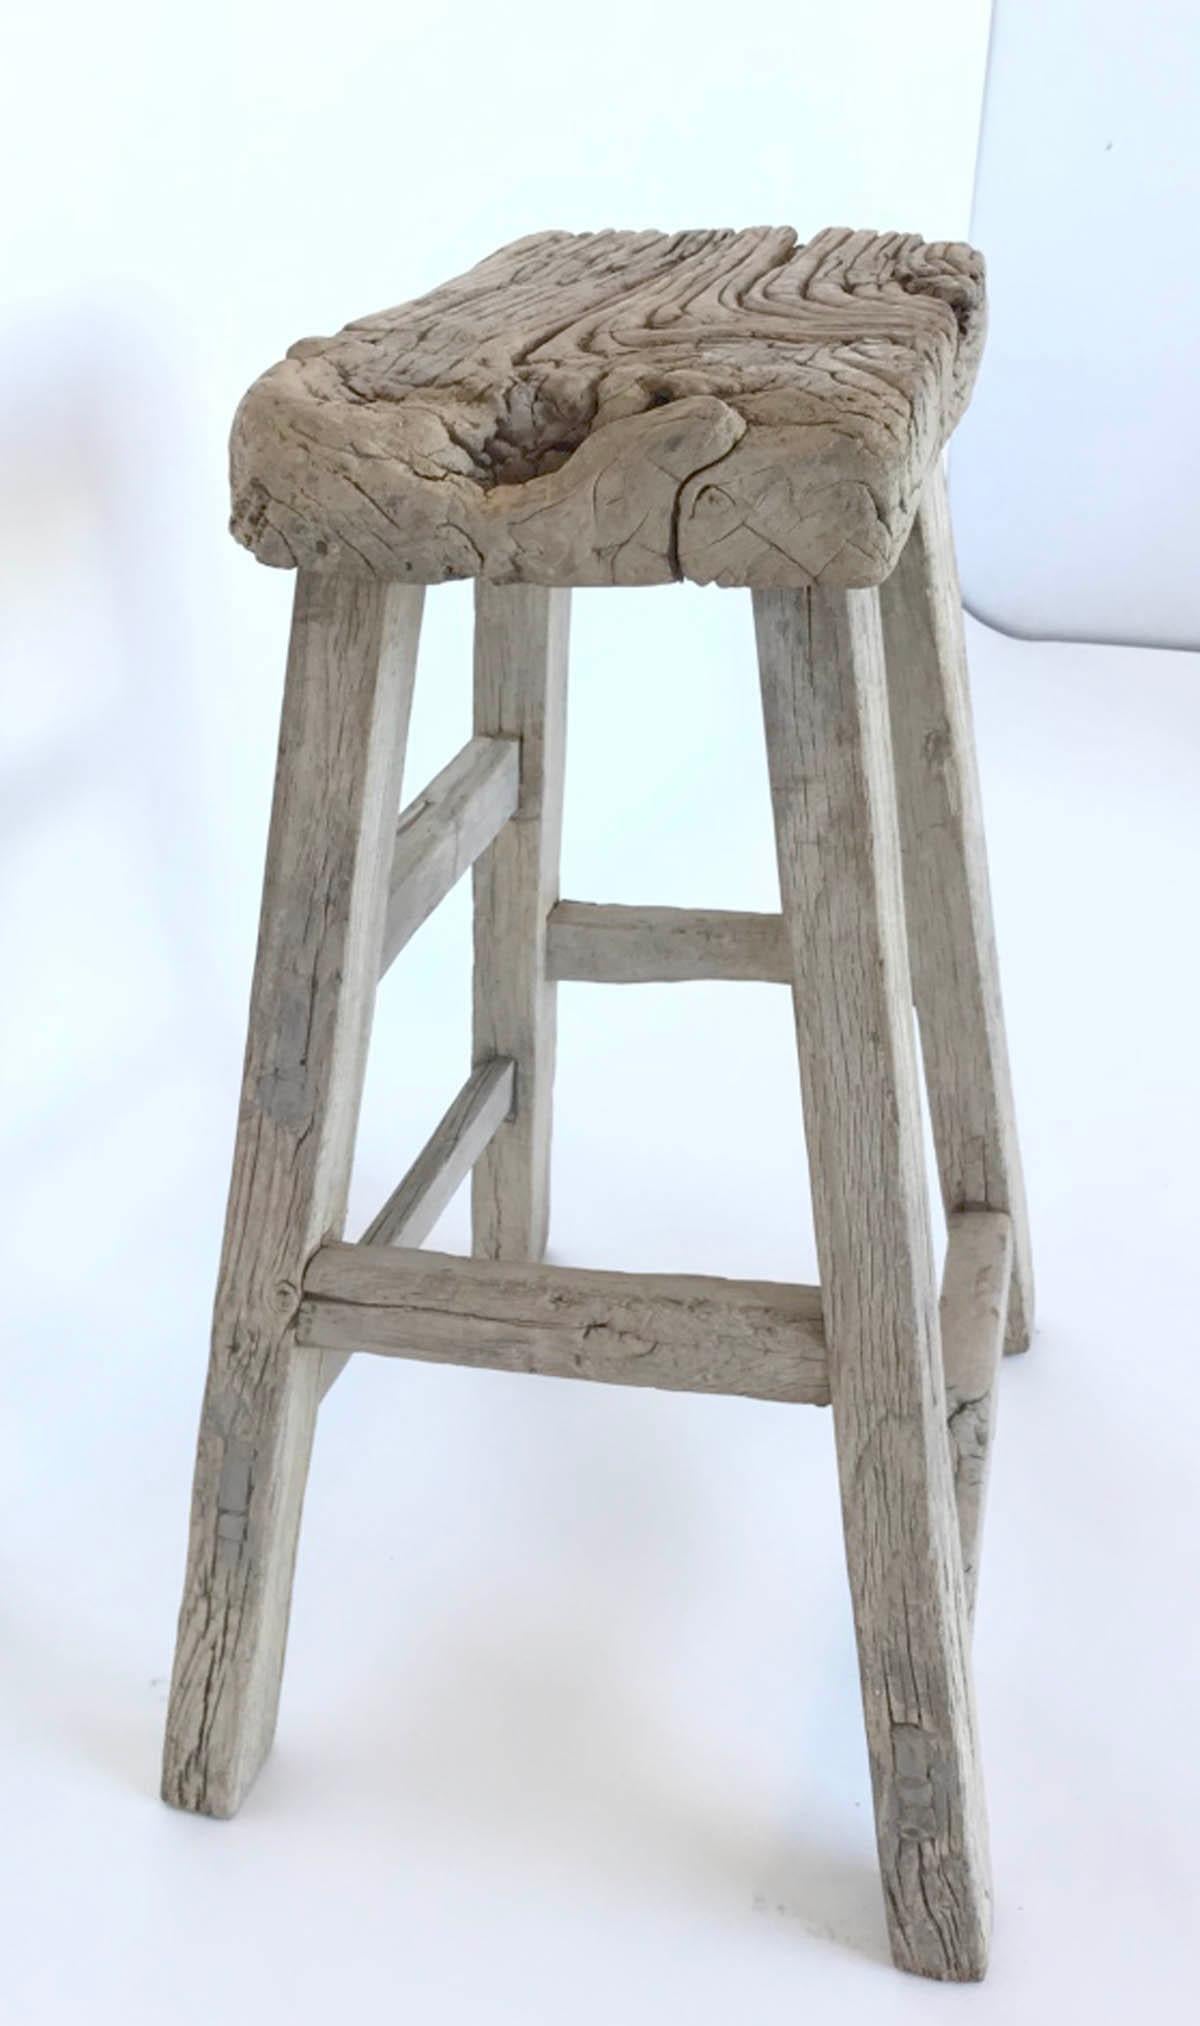 Naturally worn and aged Japanese elmwood stool in grey and beige hues. The footprint measures 24.5 x 19. Mortise and tenon stretcher. The seat is 2.5 inches thick. Great as a plant stand, side table or single stool. Height can be modified if needed.